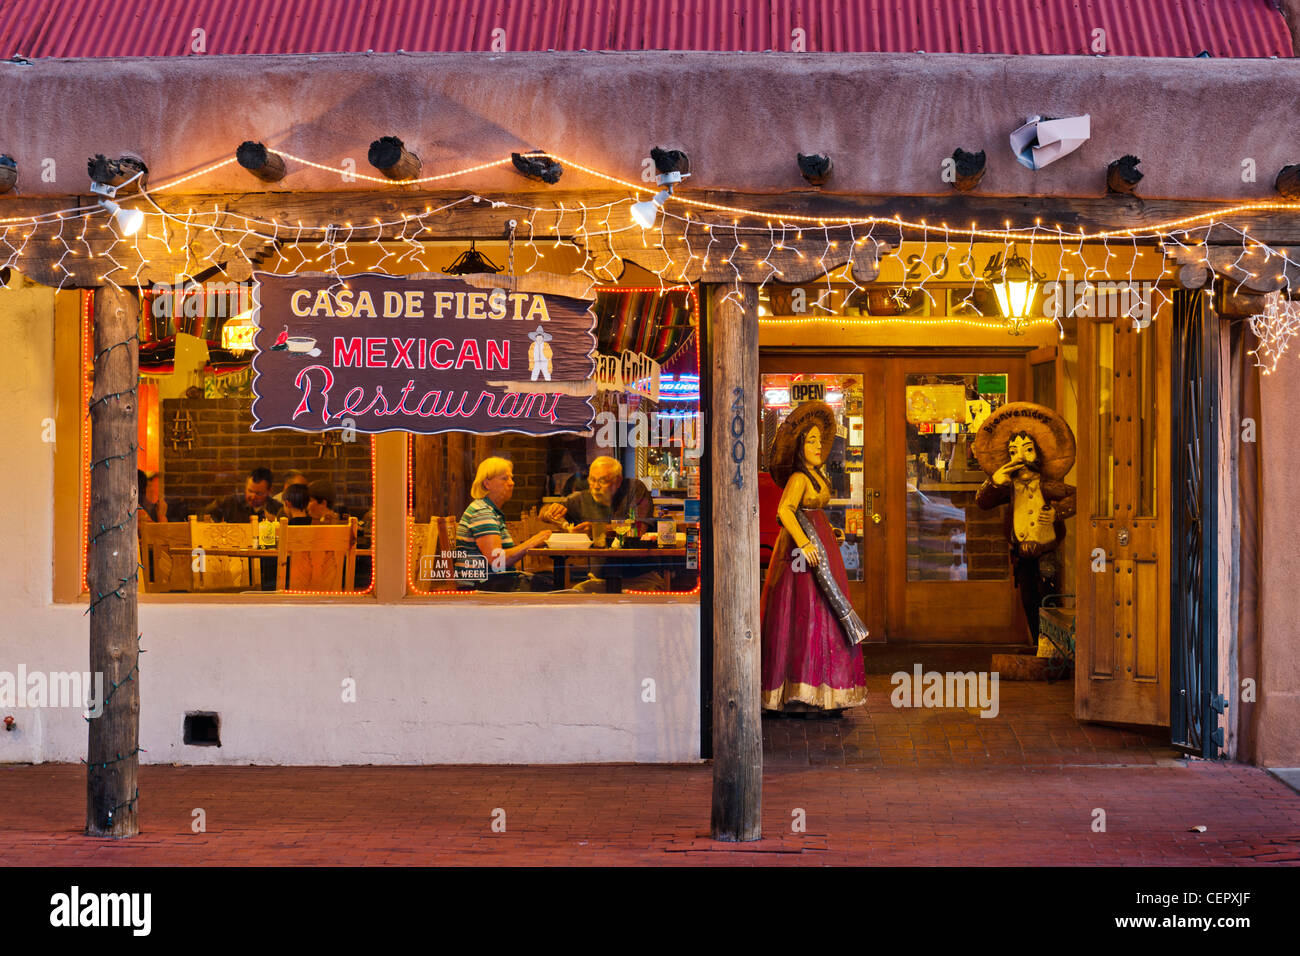 Mexican Restaurant Usa High Resolution Stock Photography and Images - Alamy